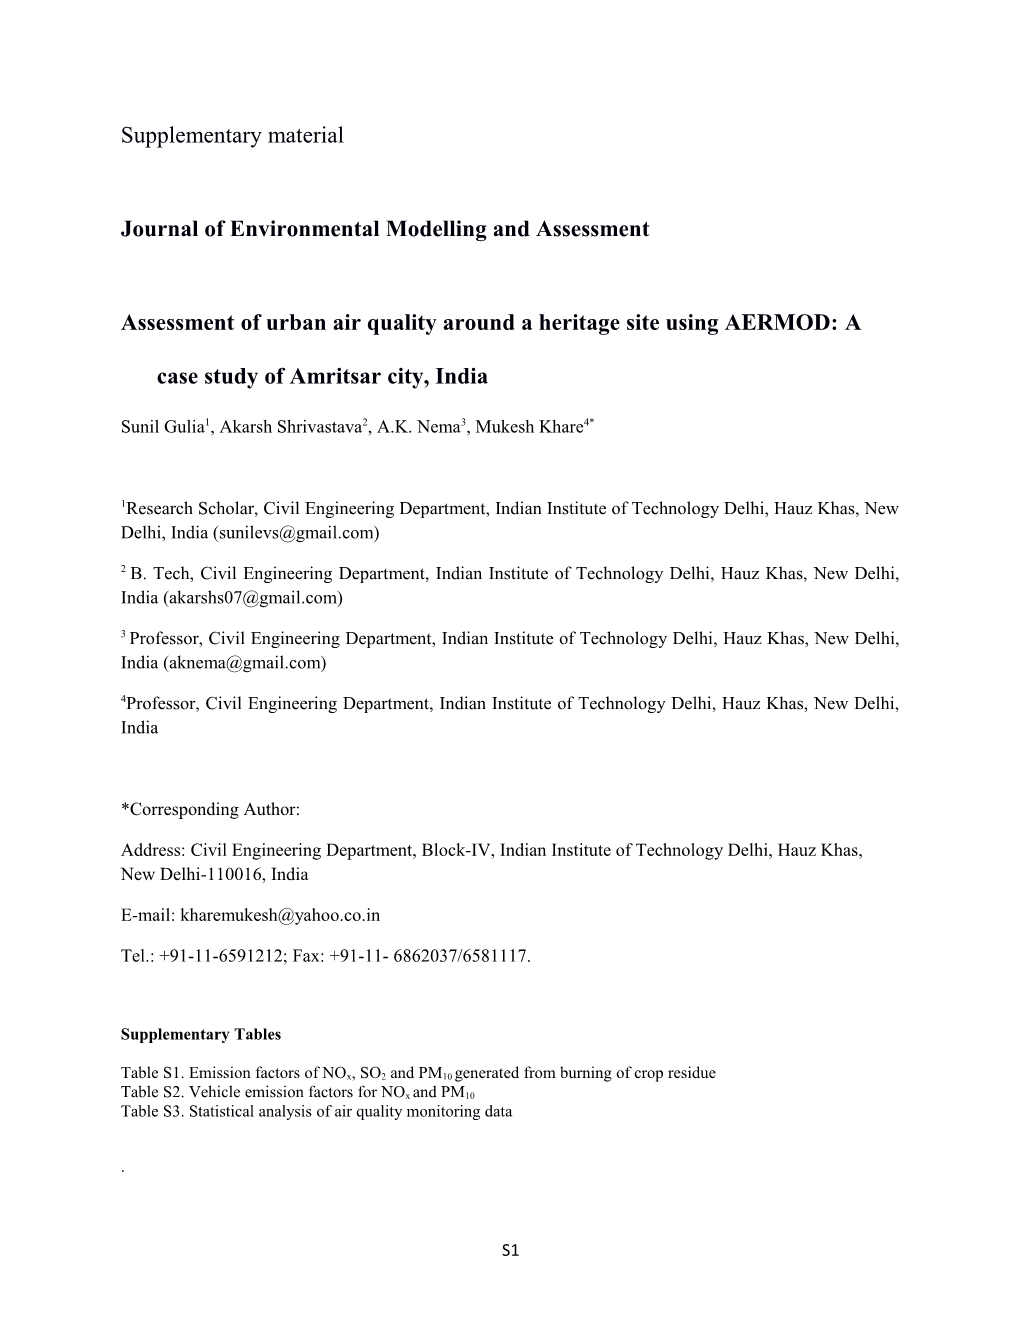 Journal of Environmental Modelling and Assessment